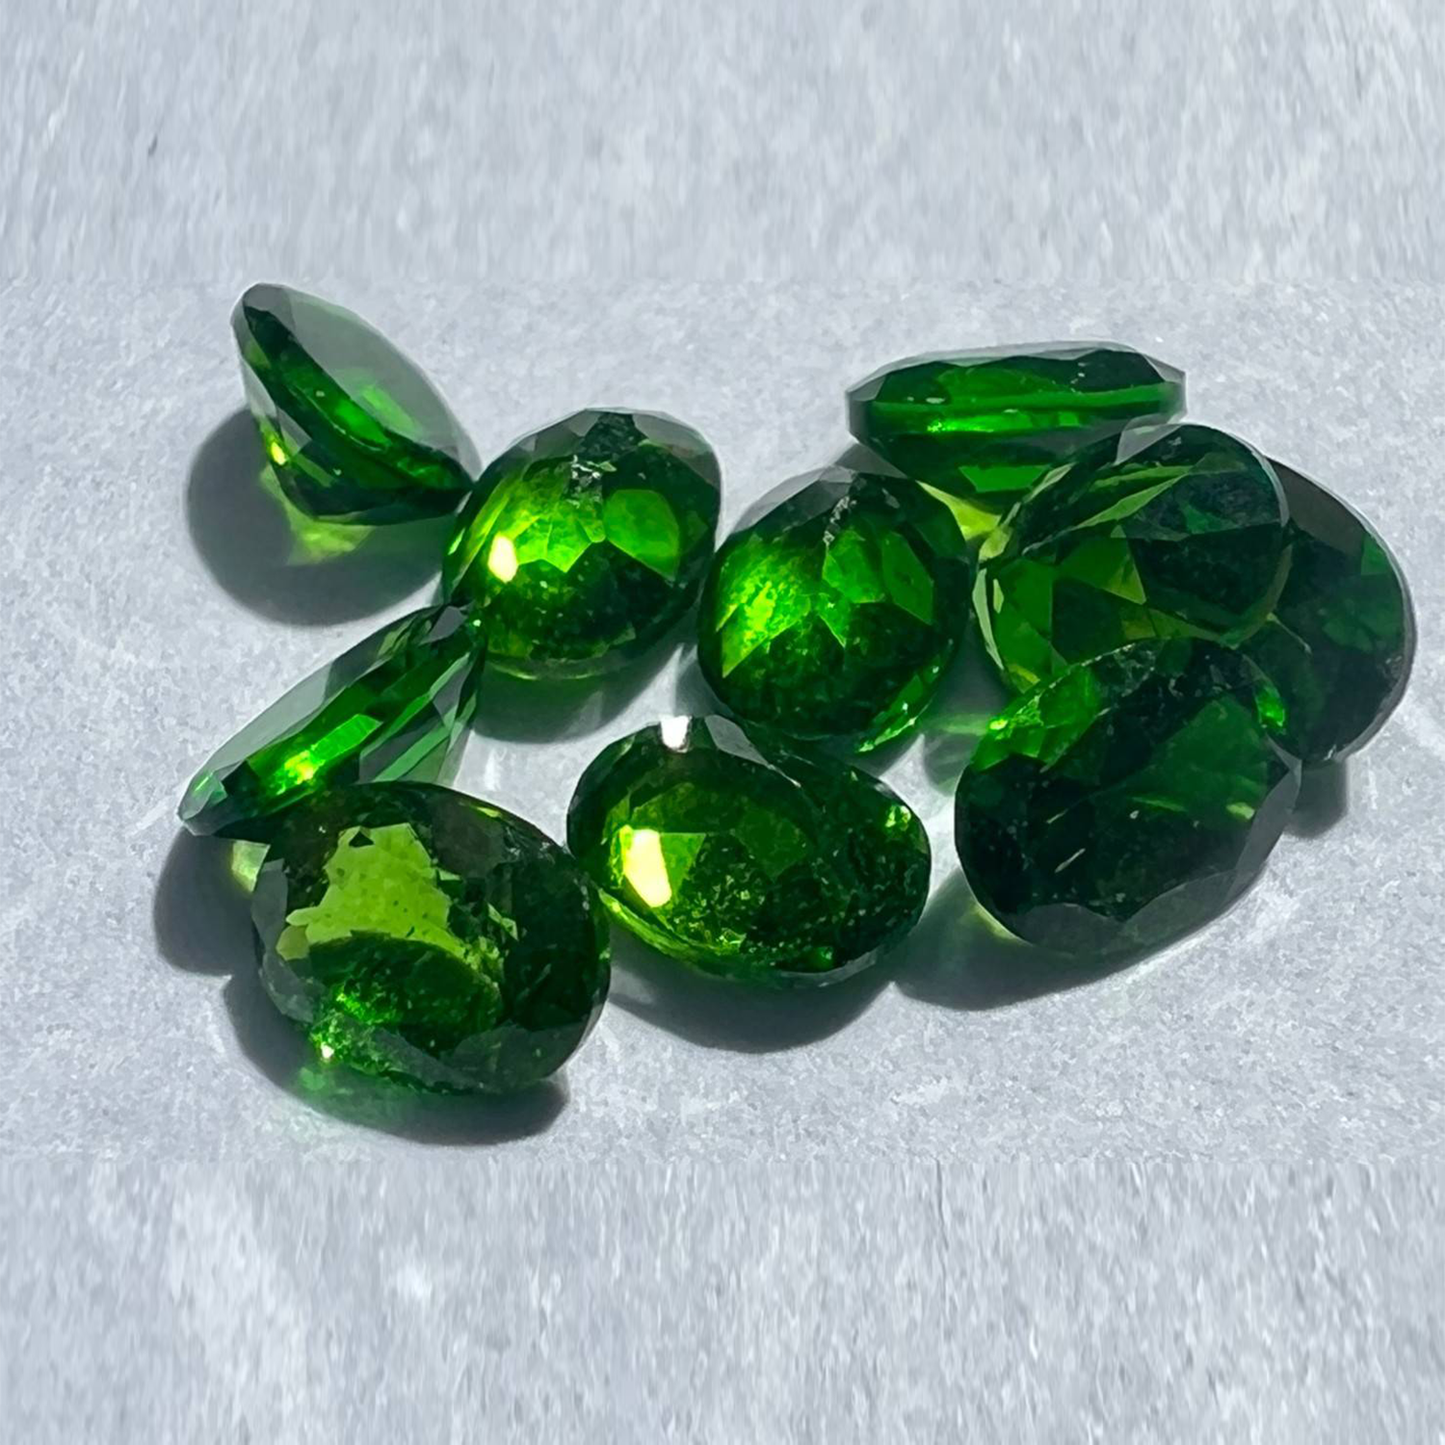 [Chrome Diopside] 3 stones combination gold #authentic